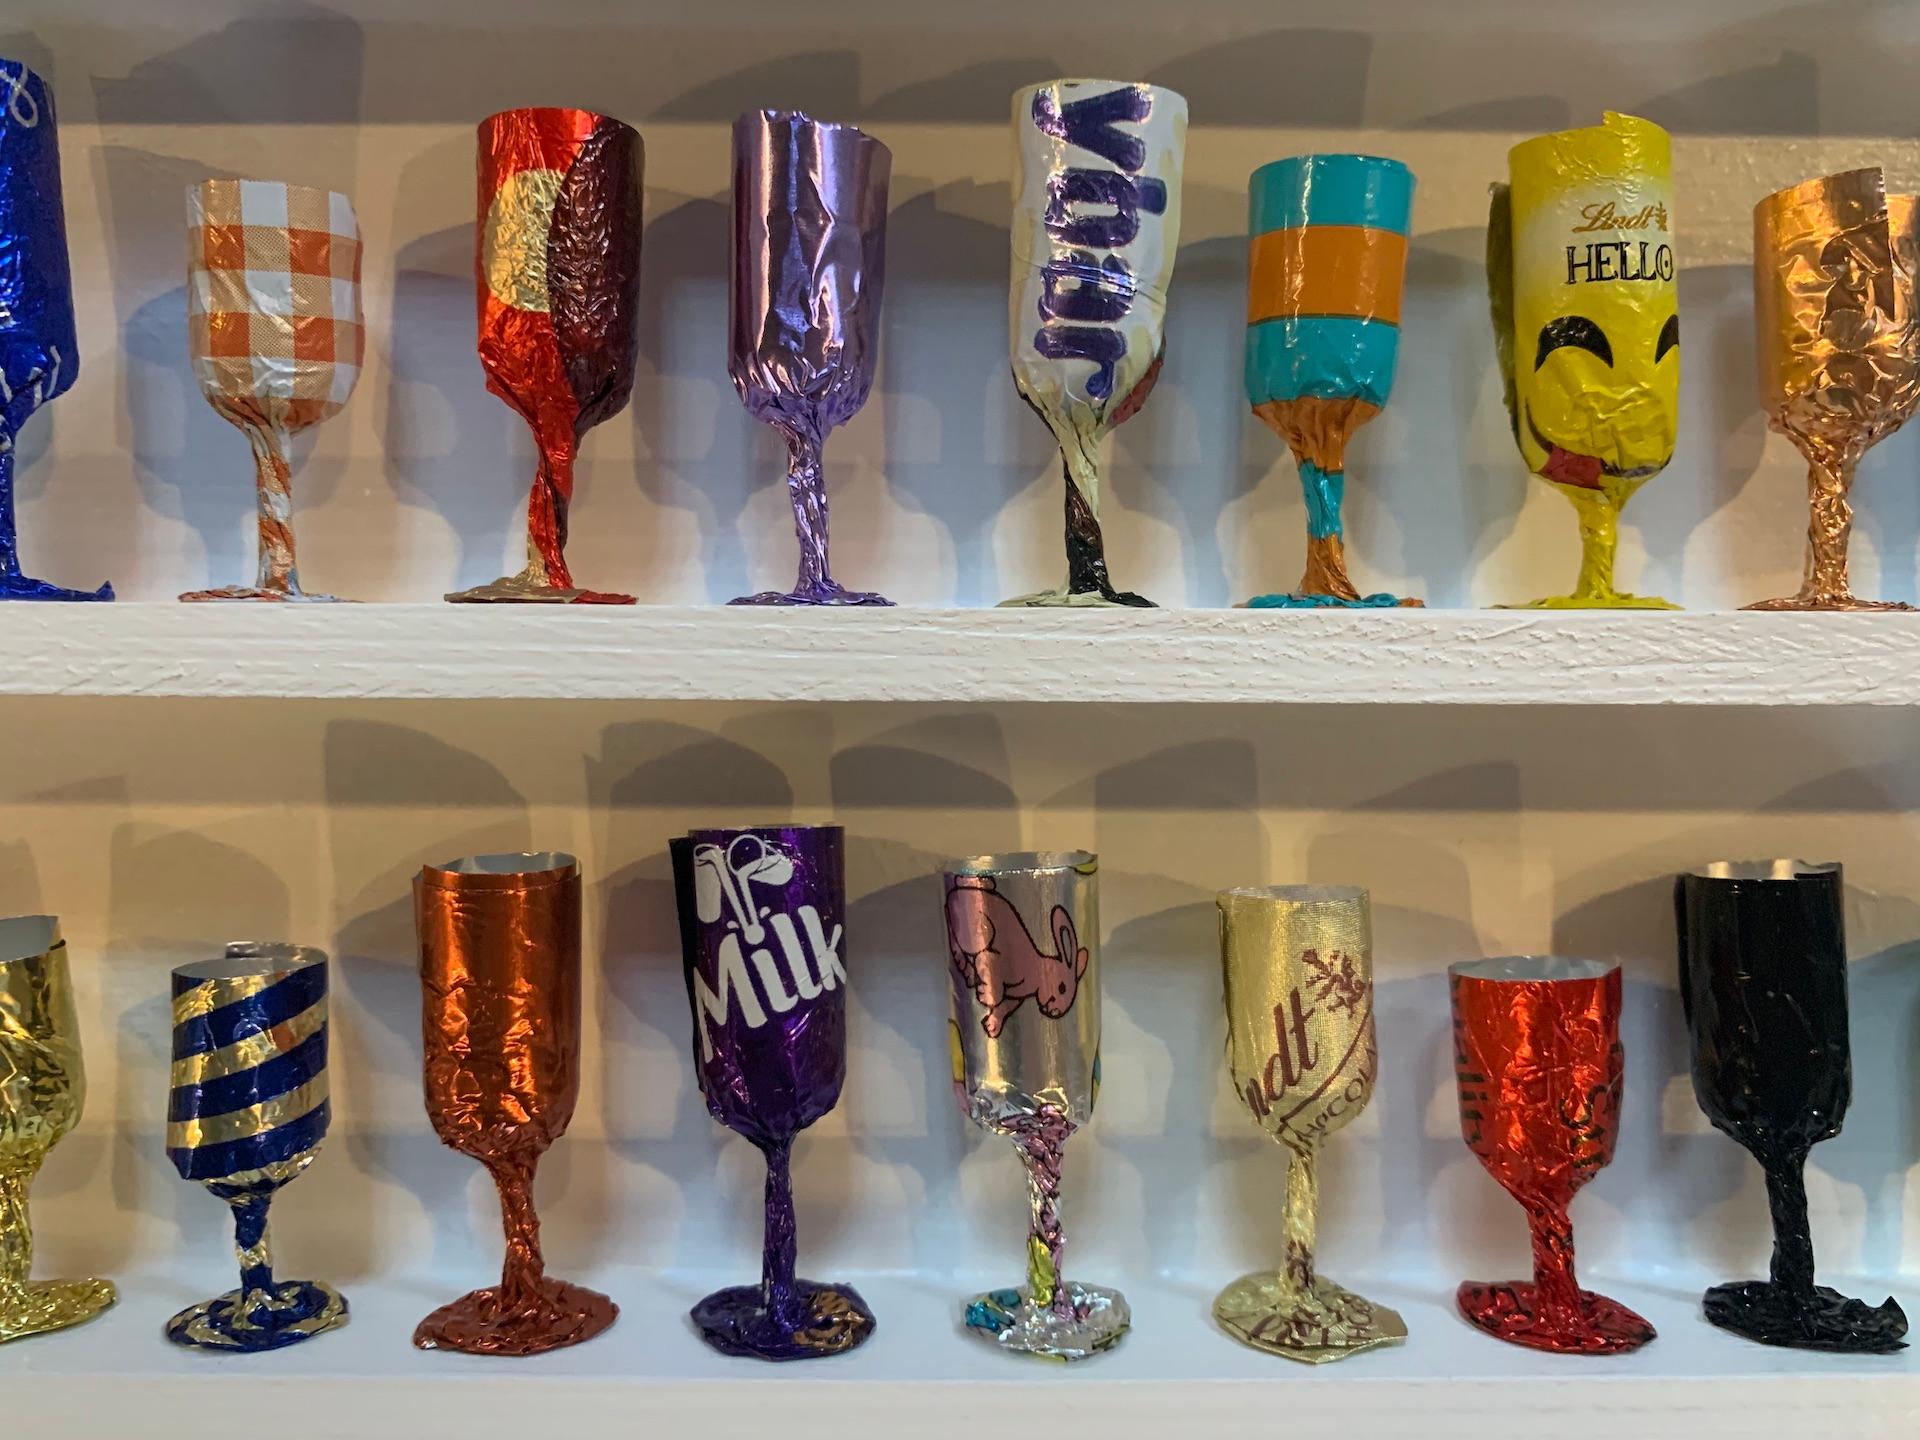 Goblets VIII by Joanne Tinker [2021]
original

Sweet wrappers

Image size: H:50 cm x W:50 cm

Complete Size of Unframed Work: H:50 cm x W:50 cm x D:4cm

Frame Size: H:50 cm x W:50 cm x D:4cm

Sold Framed

Please note that insitu images are purely an